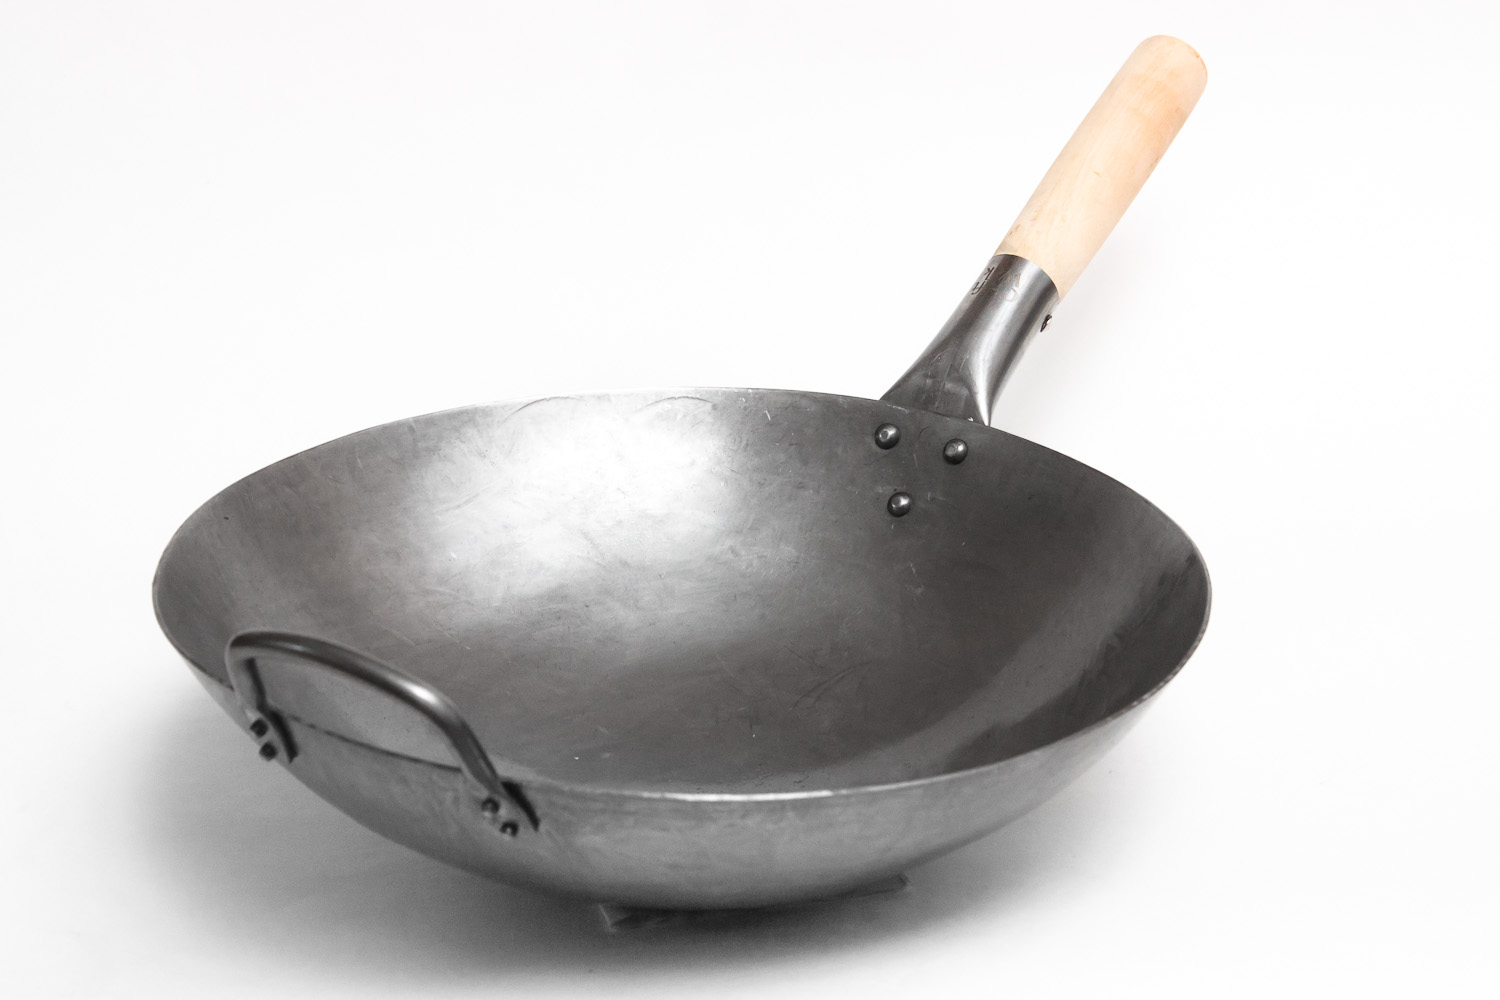 Craft Wok Traditional Hand Hammered Carbon Steel Pow Wok with Wooden and Steel Helper Handle (14 Inch, Round Bottom) / 731W88 - image 5 of 7